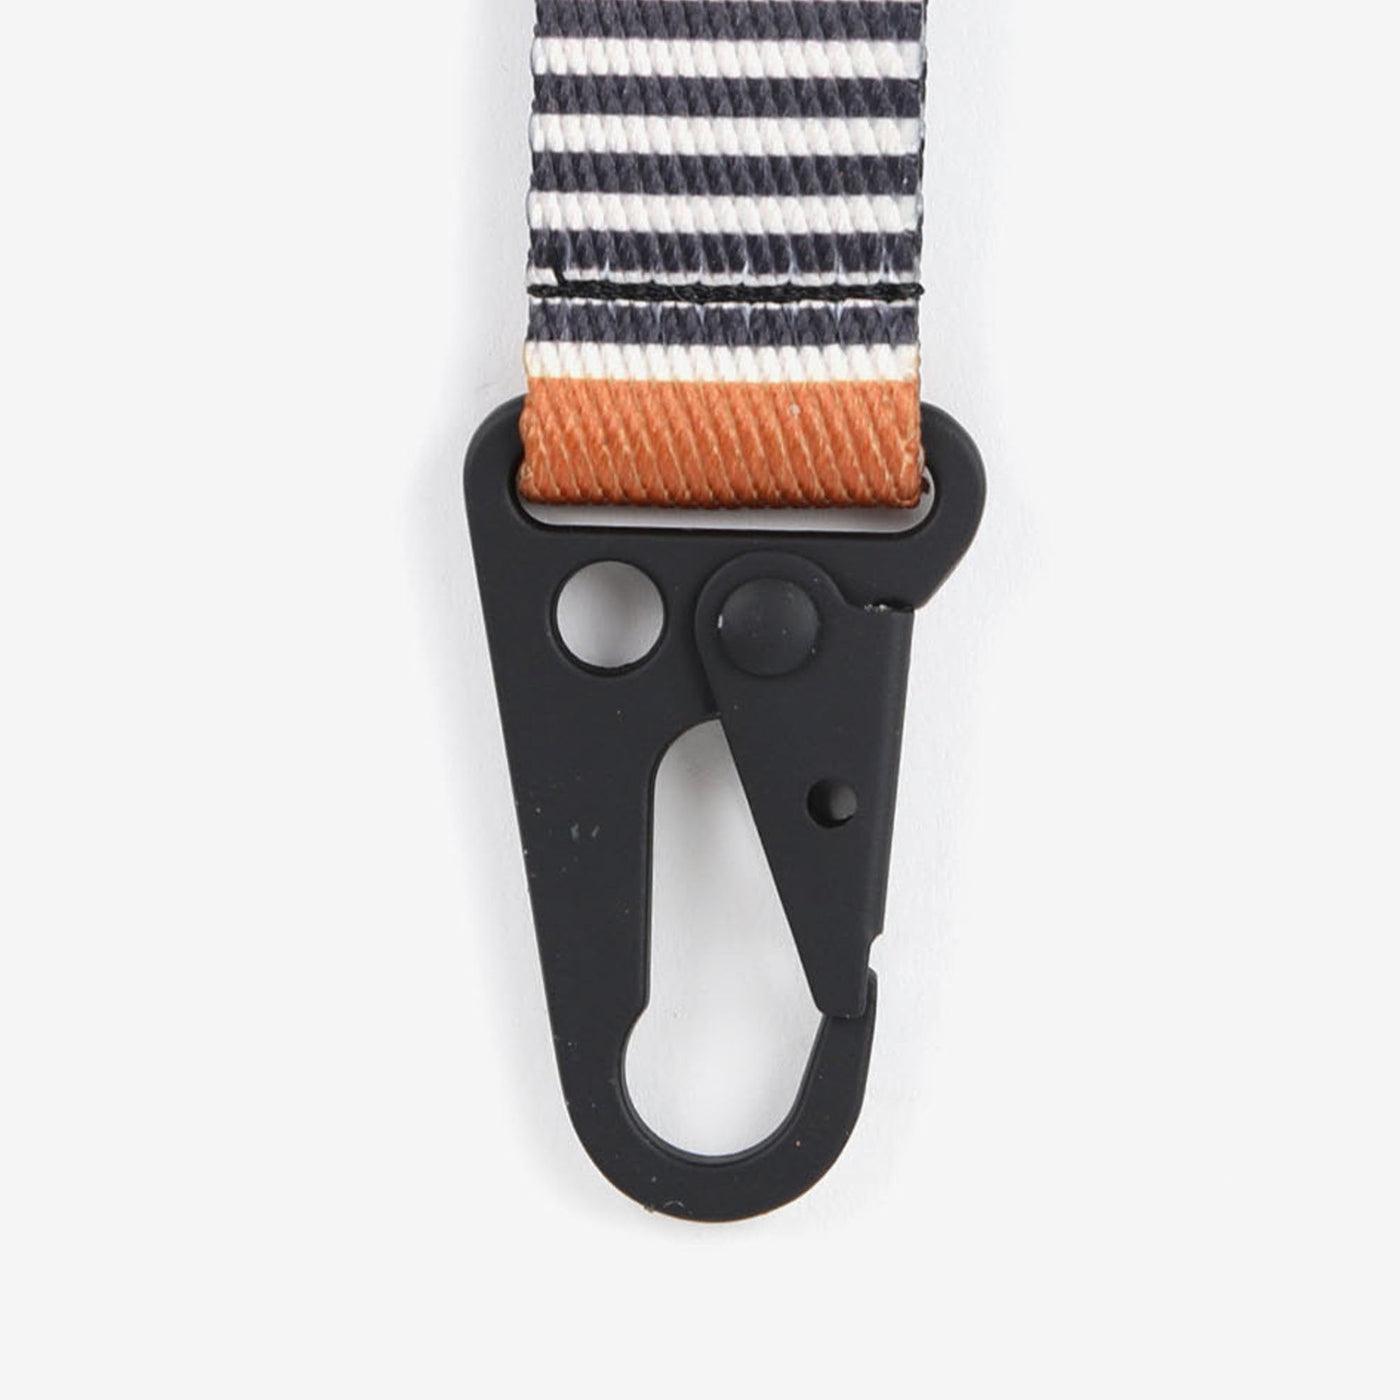 Black, white, and brown striped keychain clip